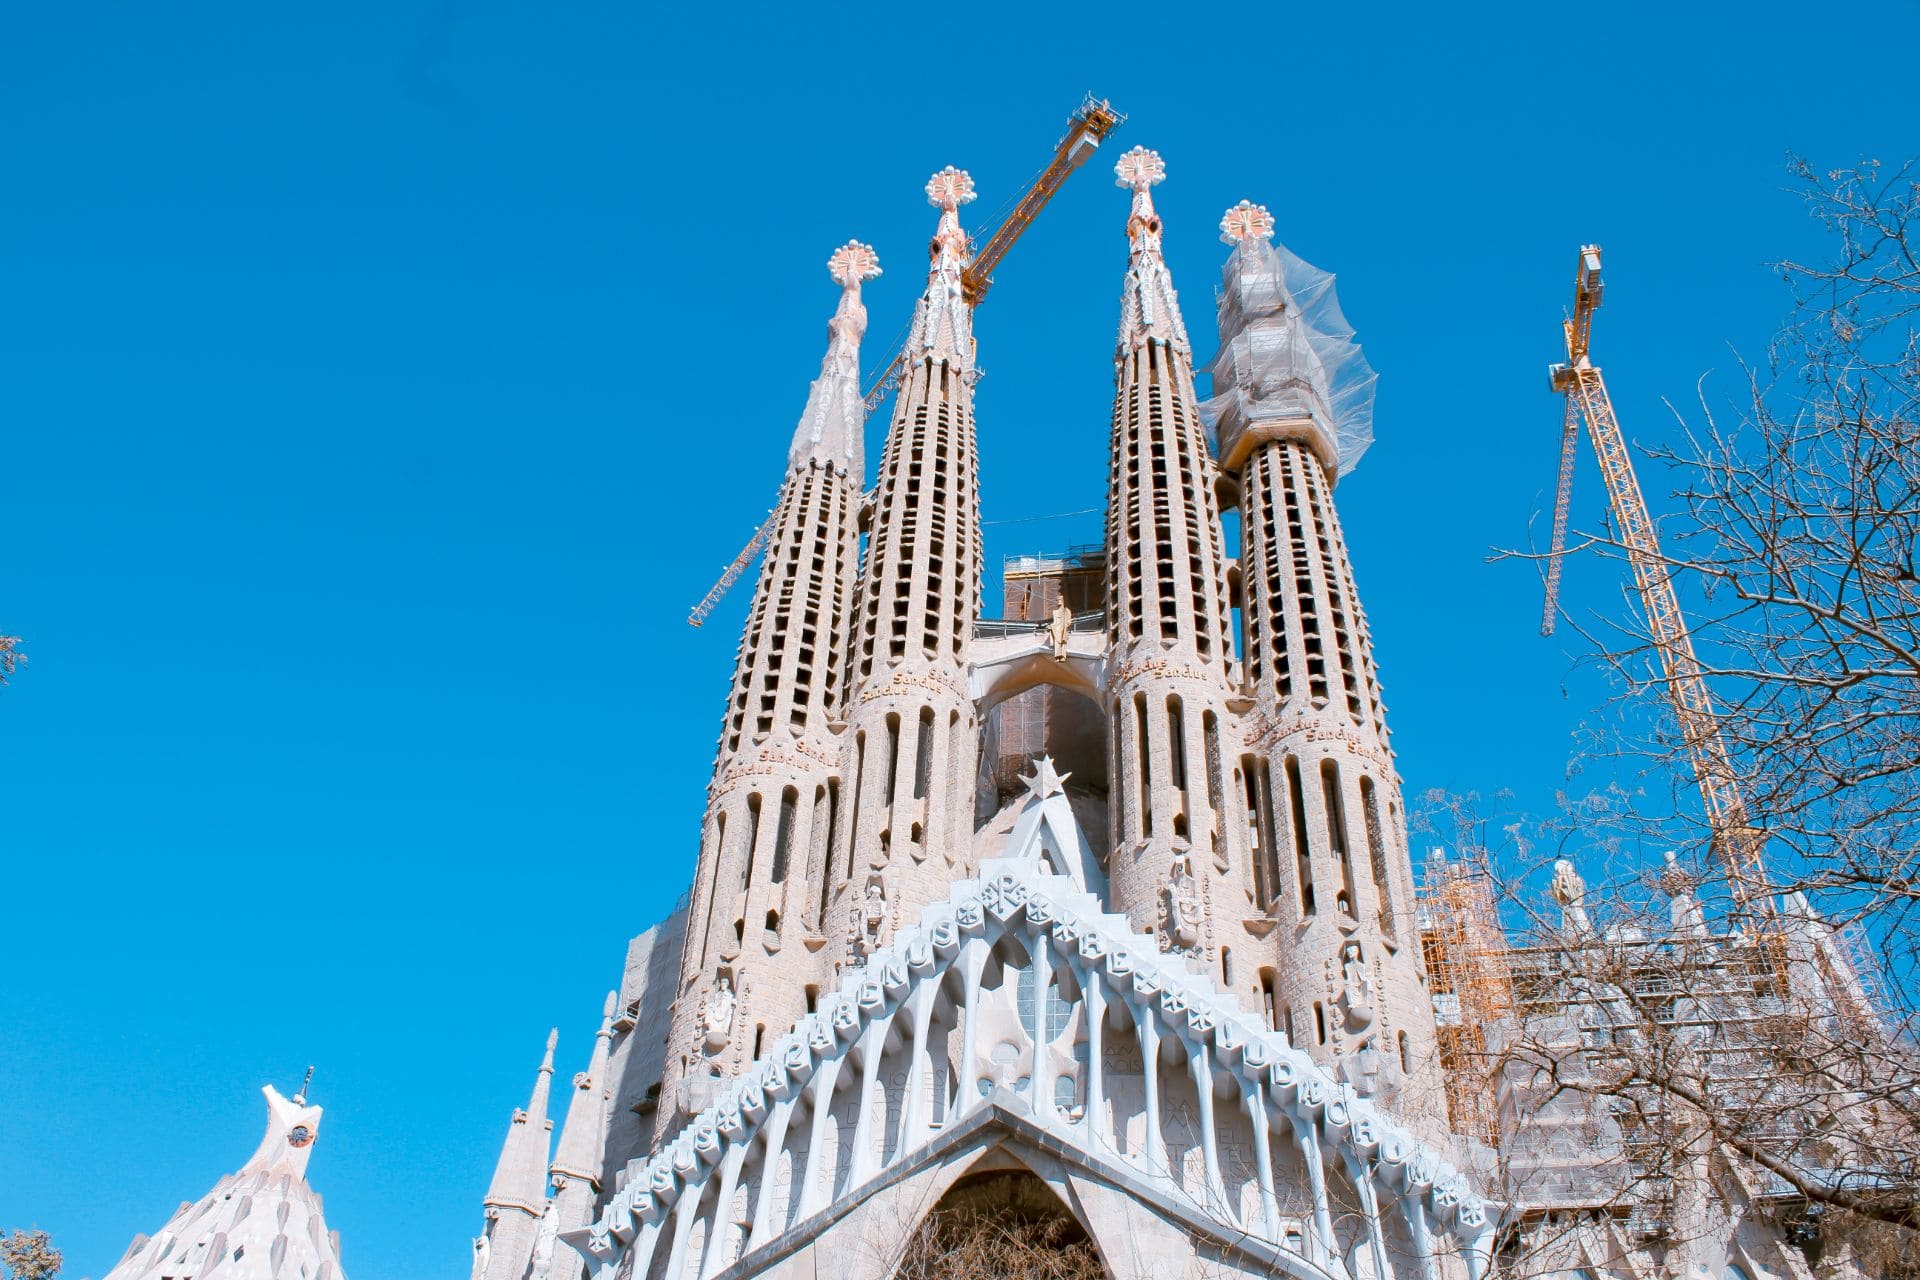 extravagent-church-on-a-summers-day-against-blue-skies-sagrada-familia-famous-tourist-attraction-in-barcelona-two-days-in-barcelona